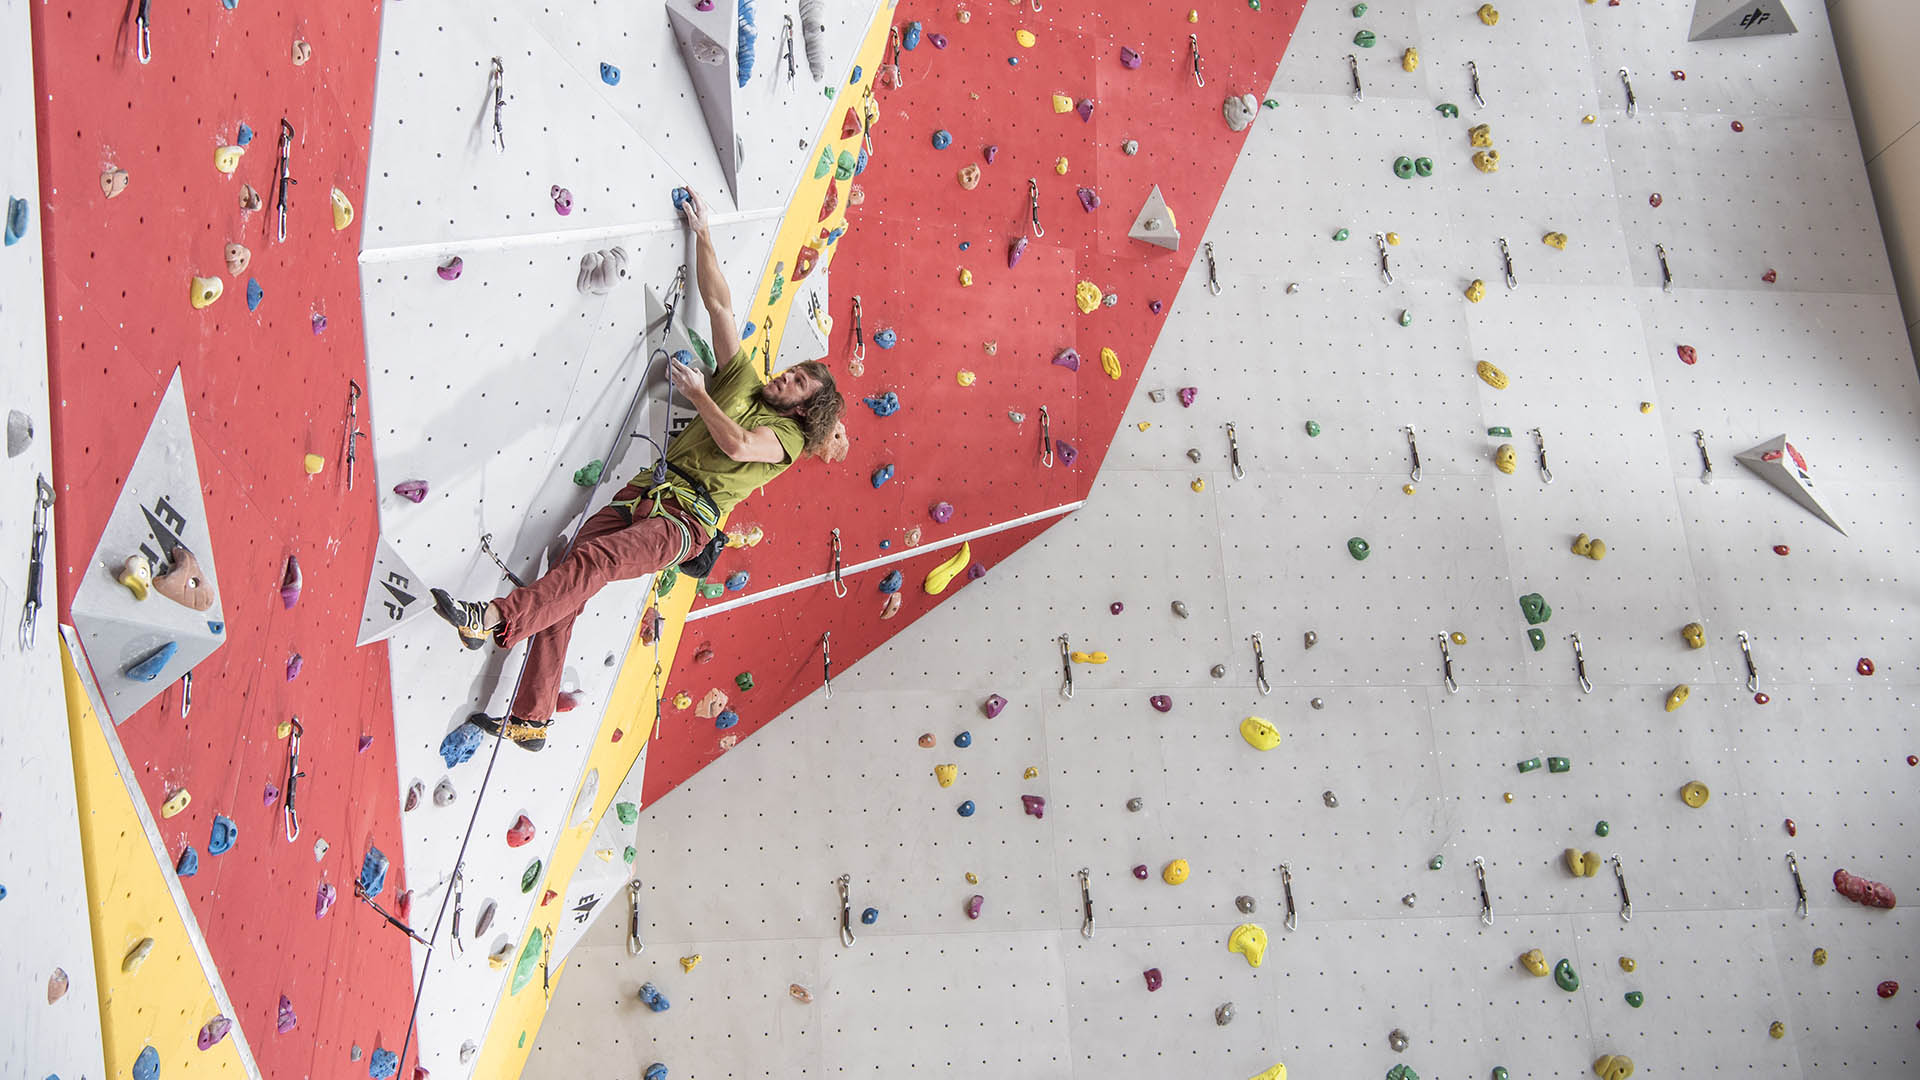 A man is roped up in an indoor climbing hall.